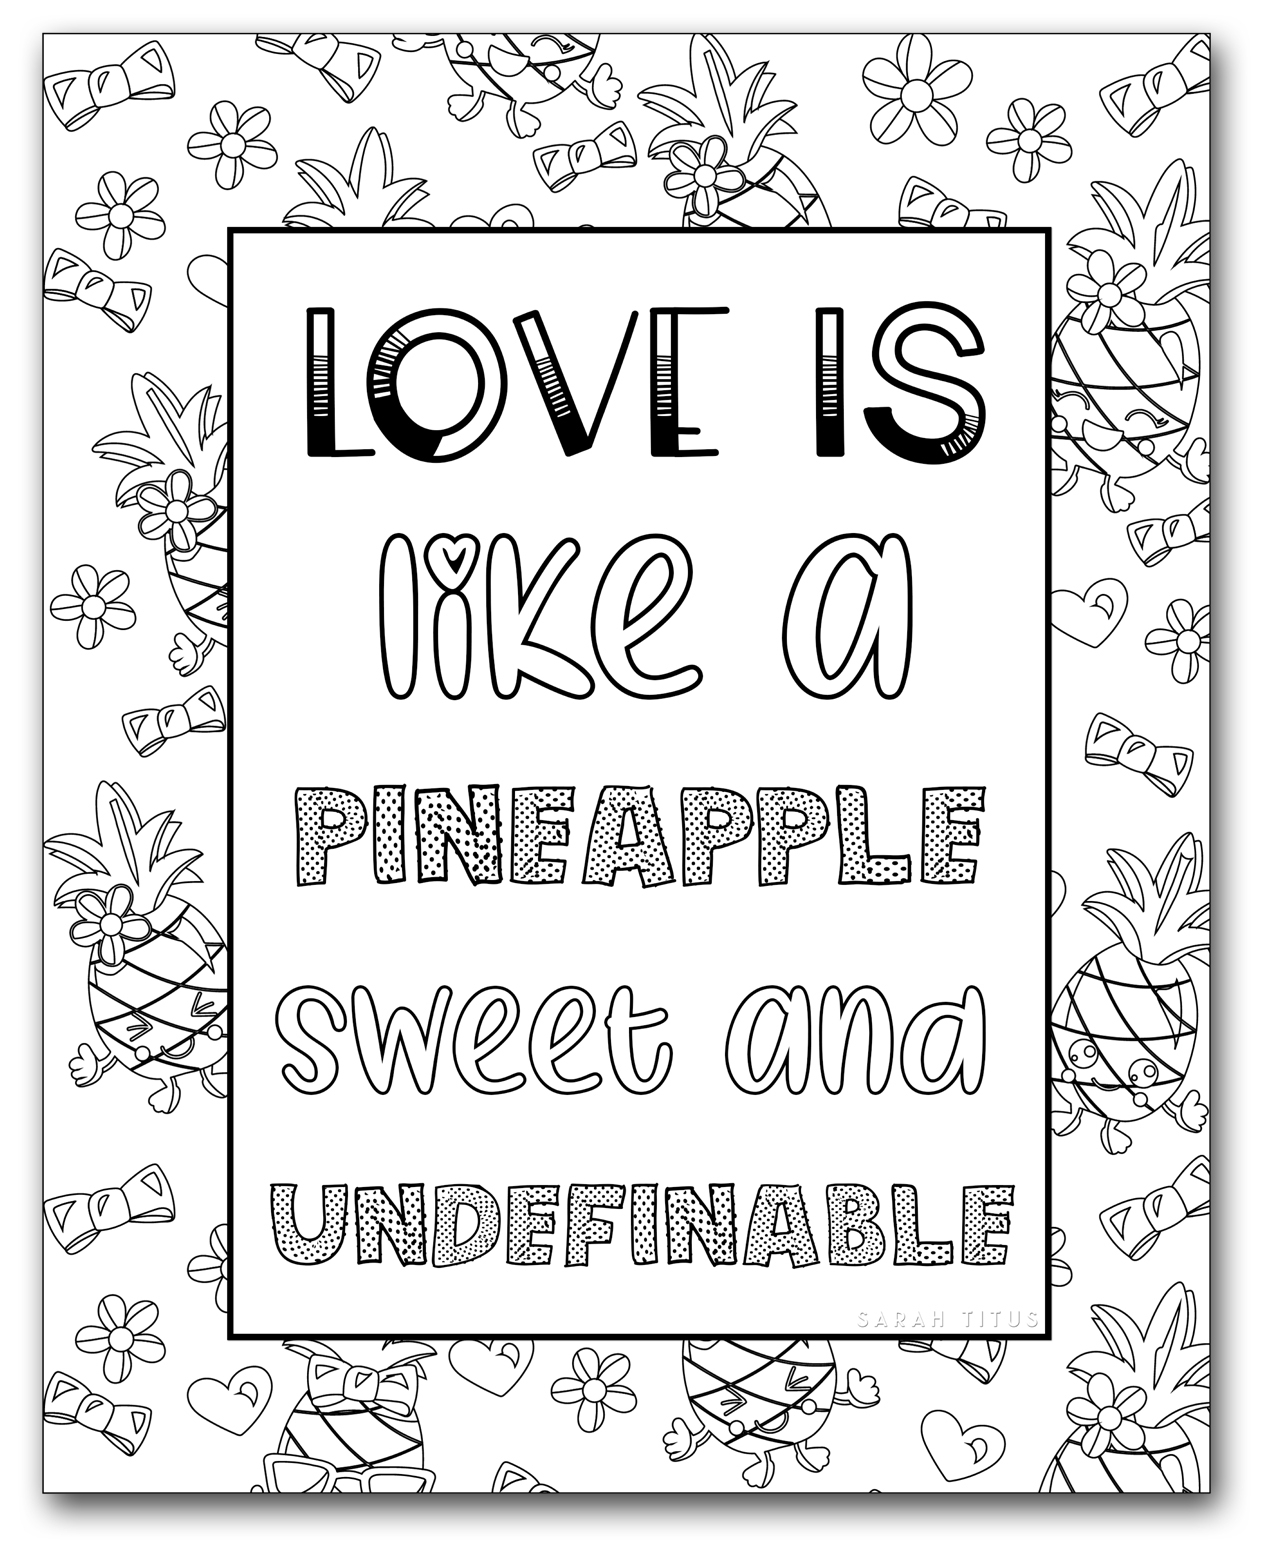 Printables Coloring Pages Printable Coloring Pages For Girls Sarah Titus